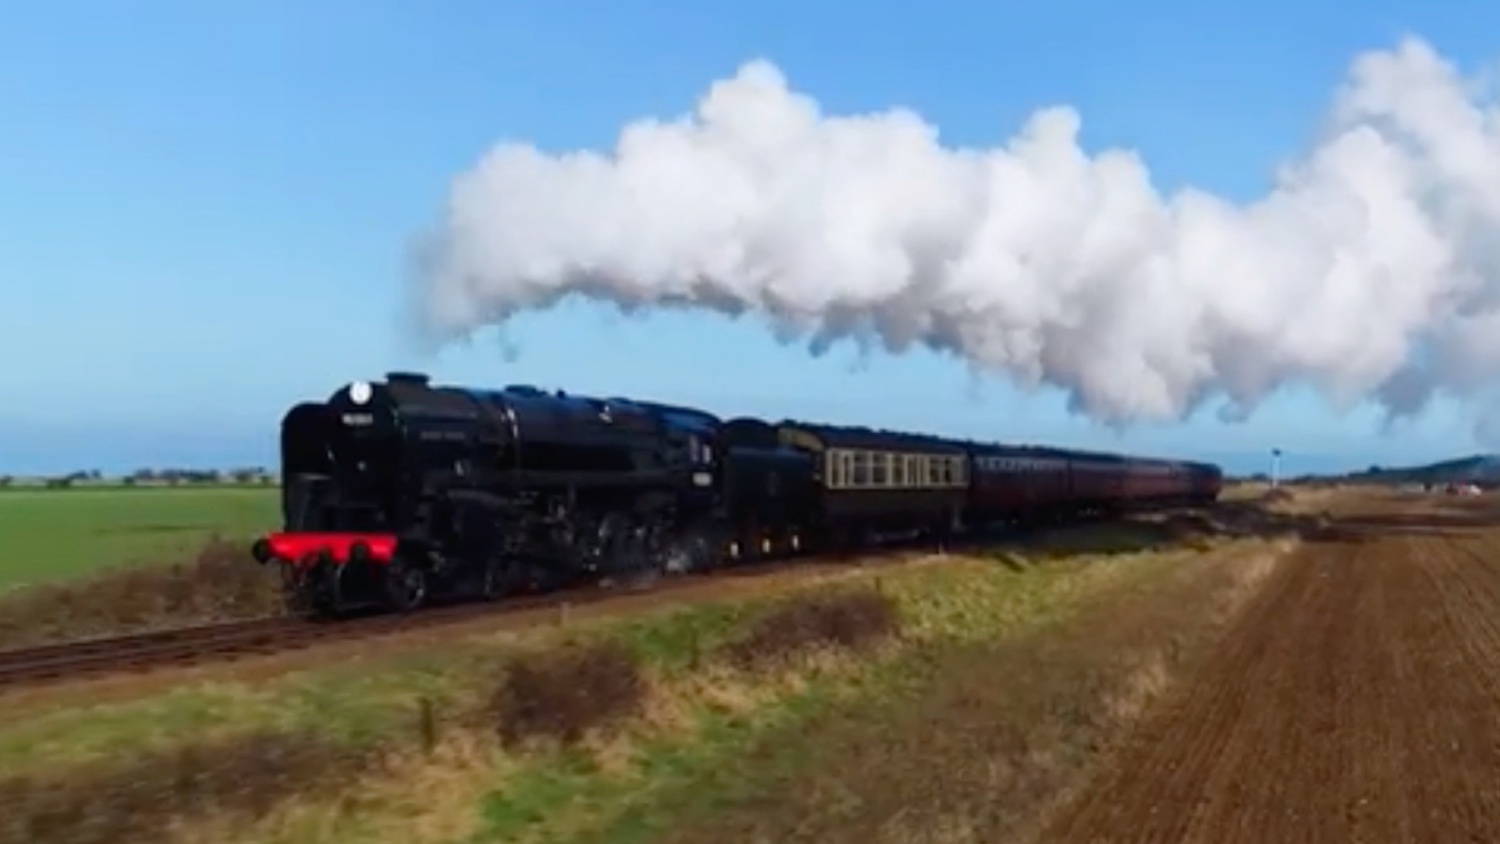 Check out these steam locomotives captured with a drone